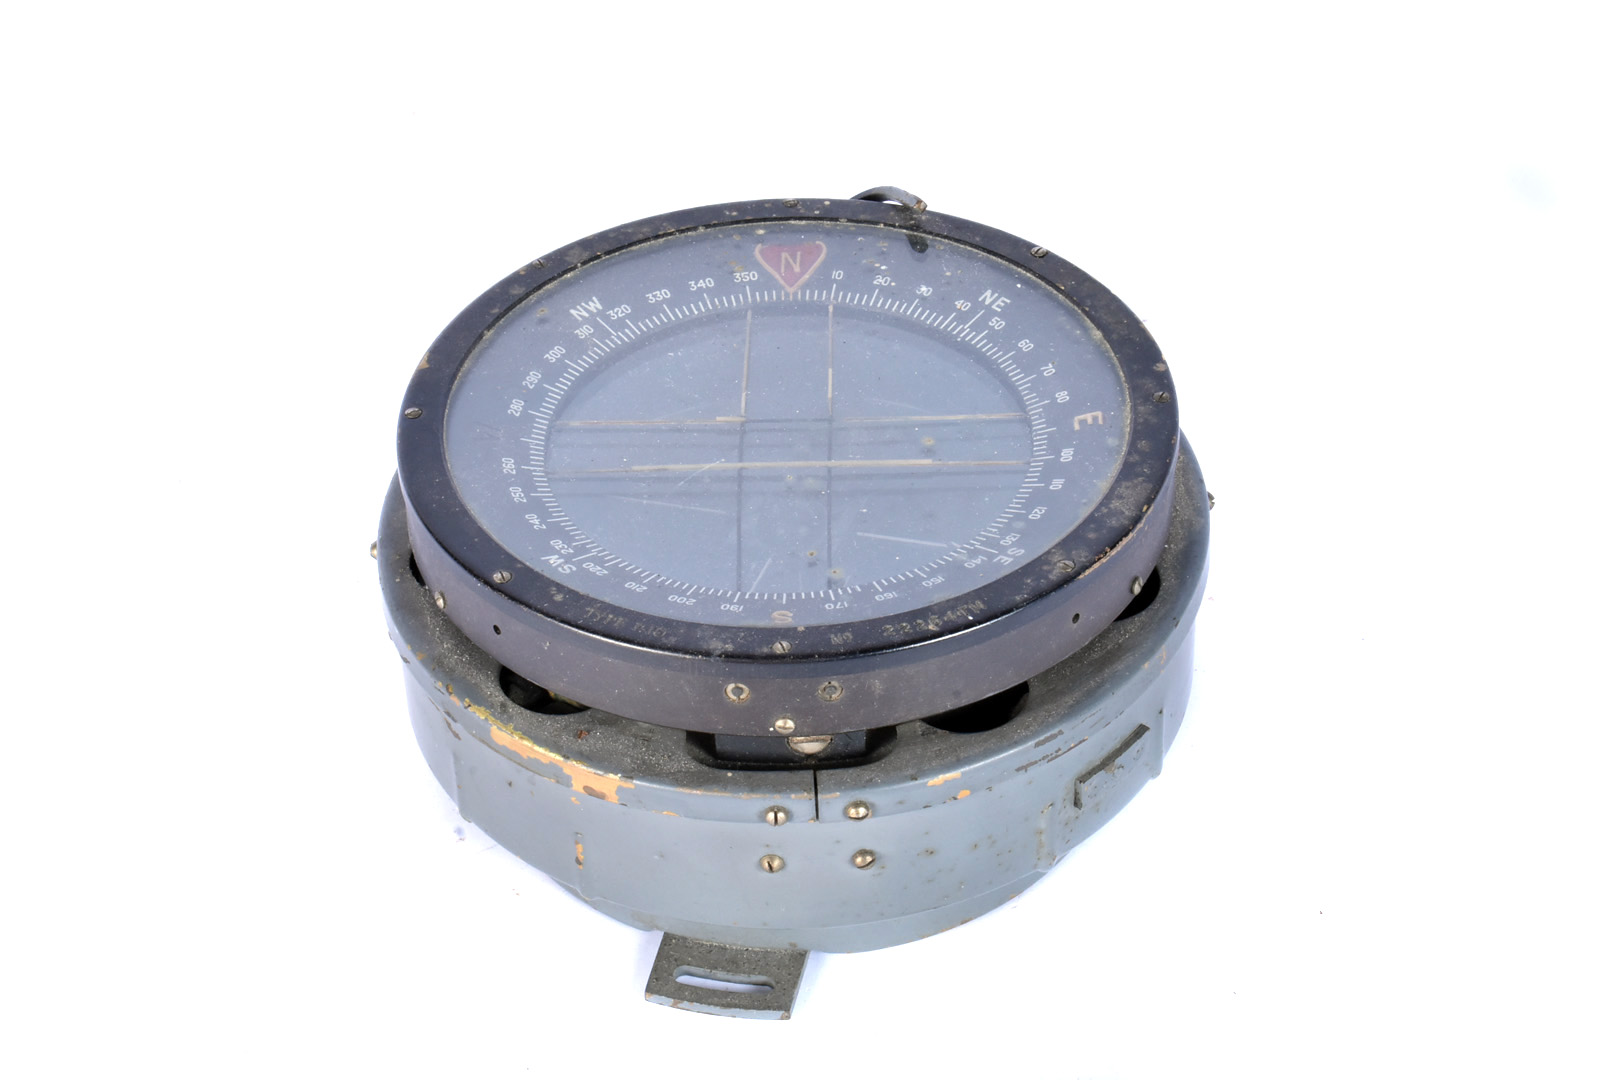 A WWII Type P10 Aviation compass, either from a Spitfire, Hurricane or Lancaster bomber, No.22264TM,